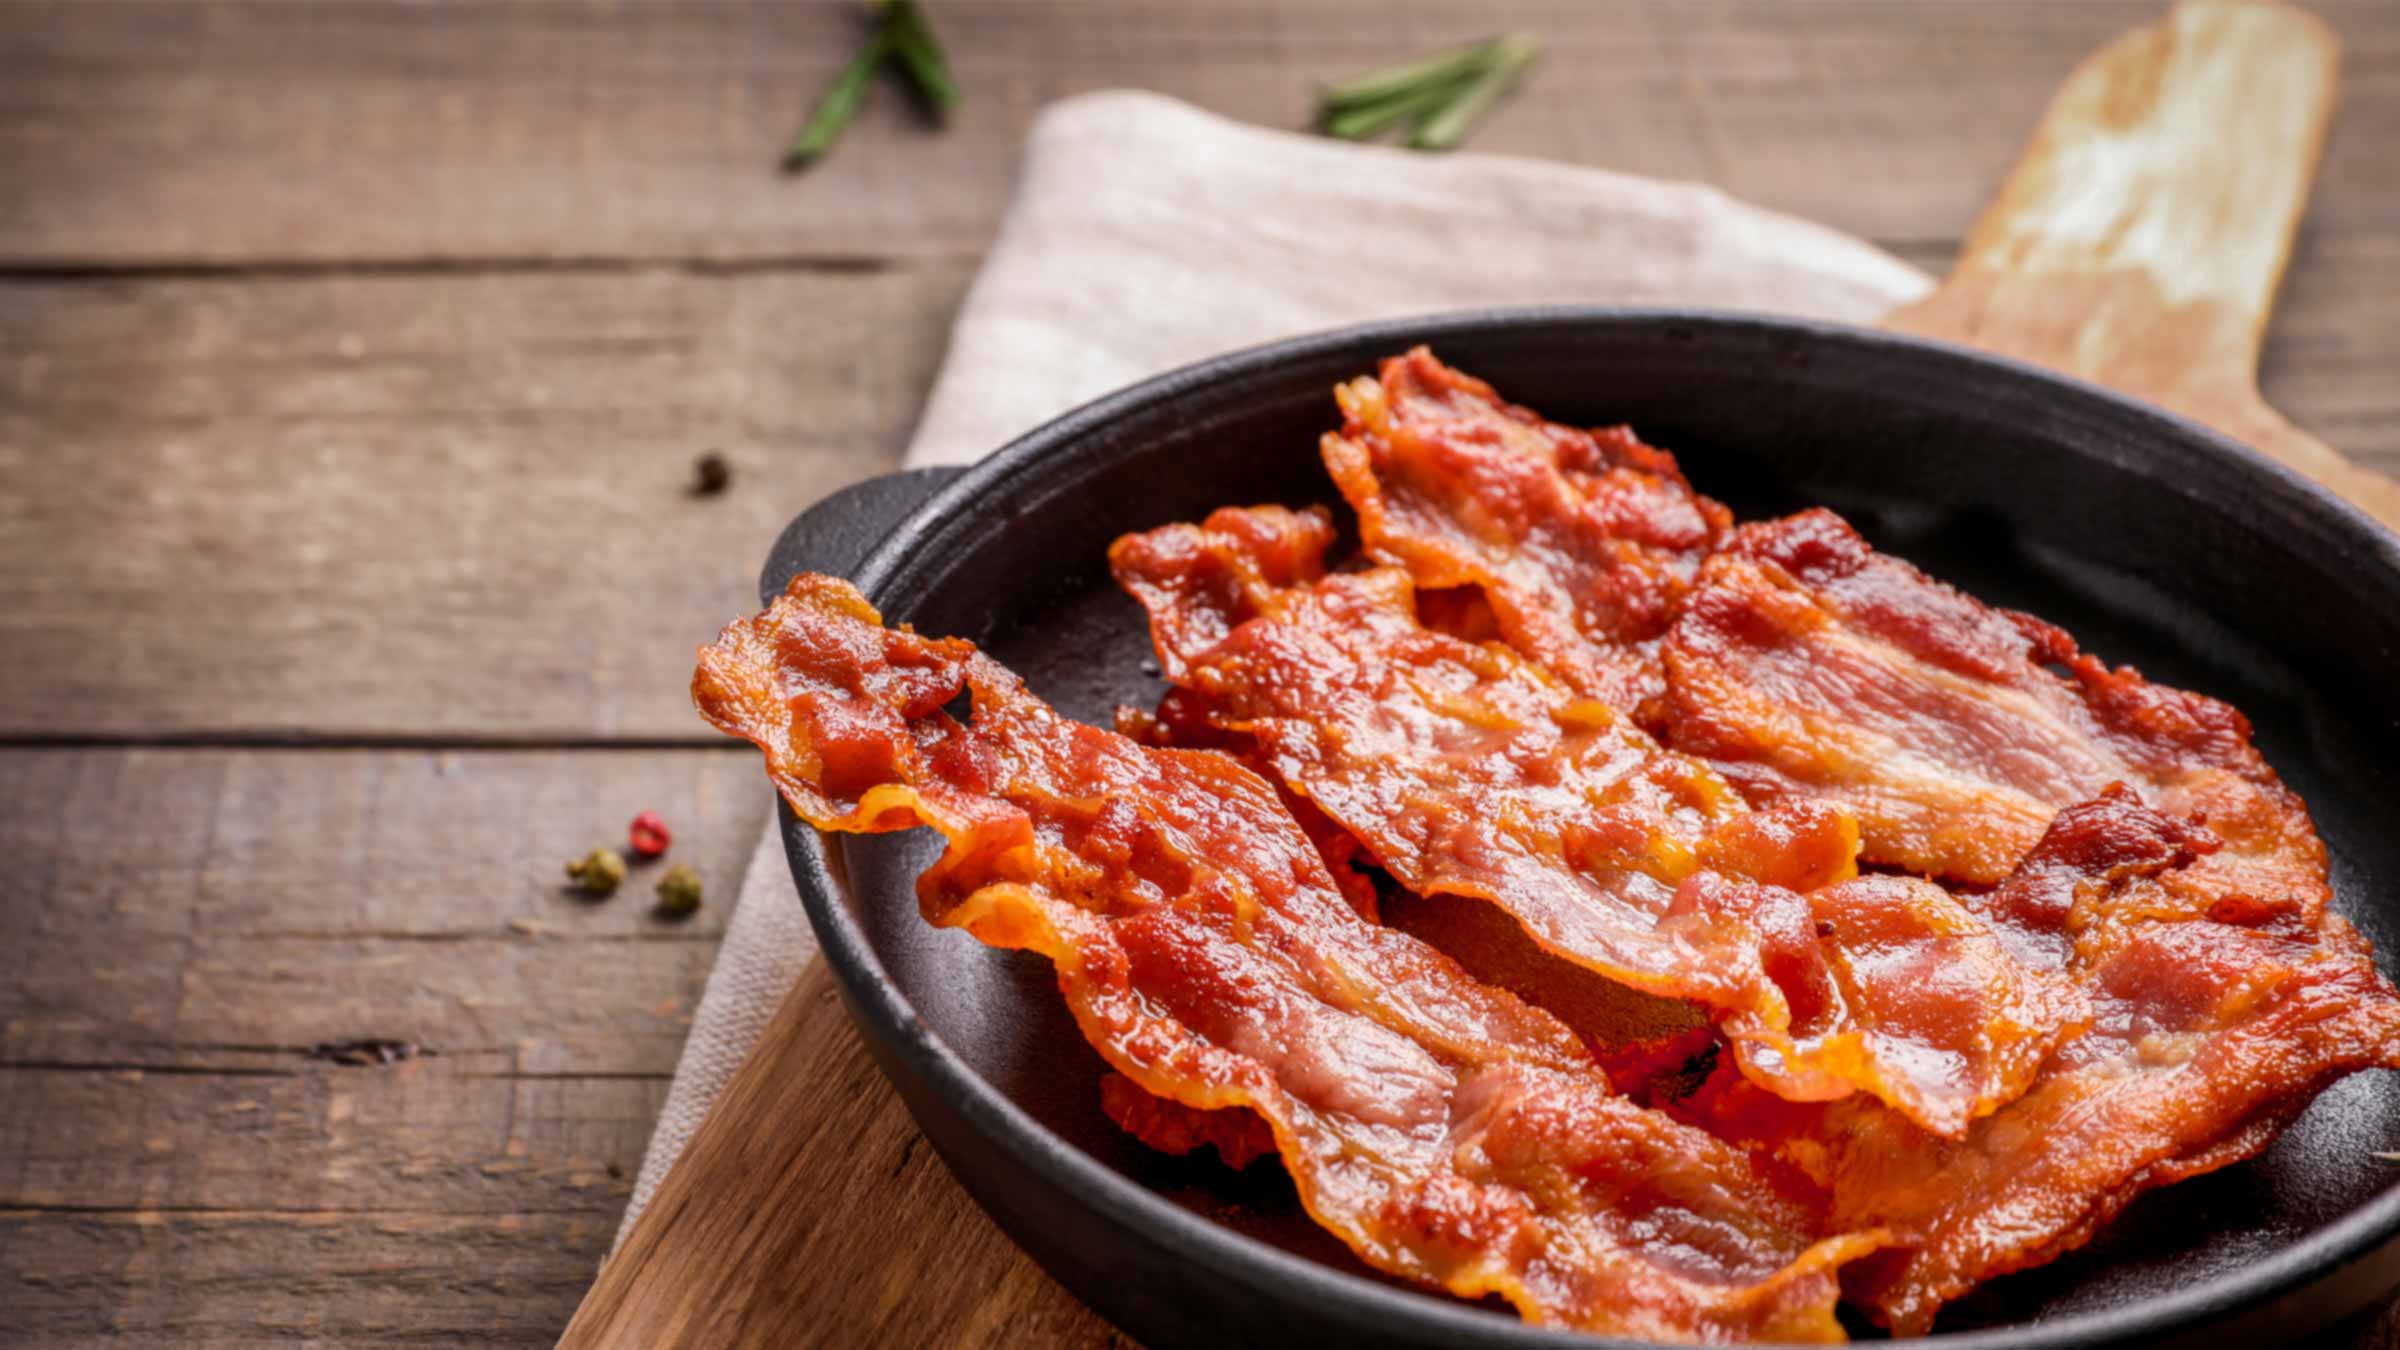 Cooked bacon in a skillet on wood table